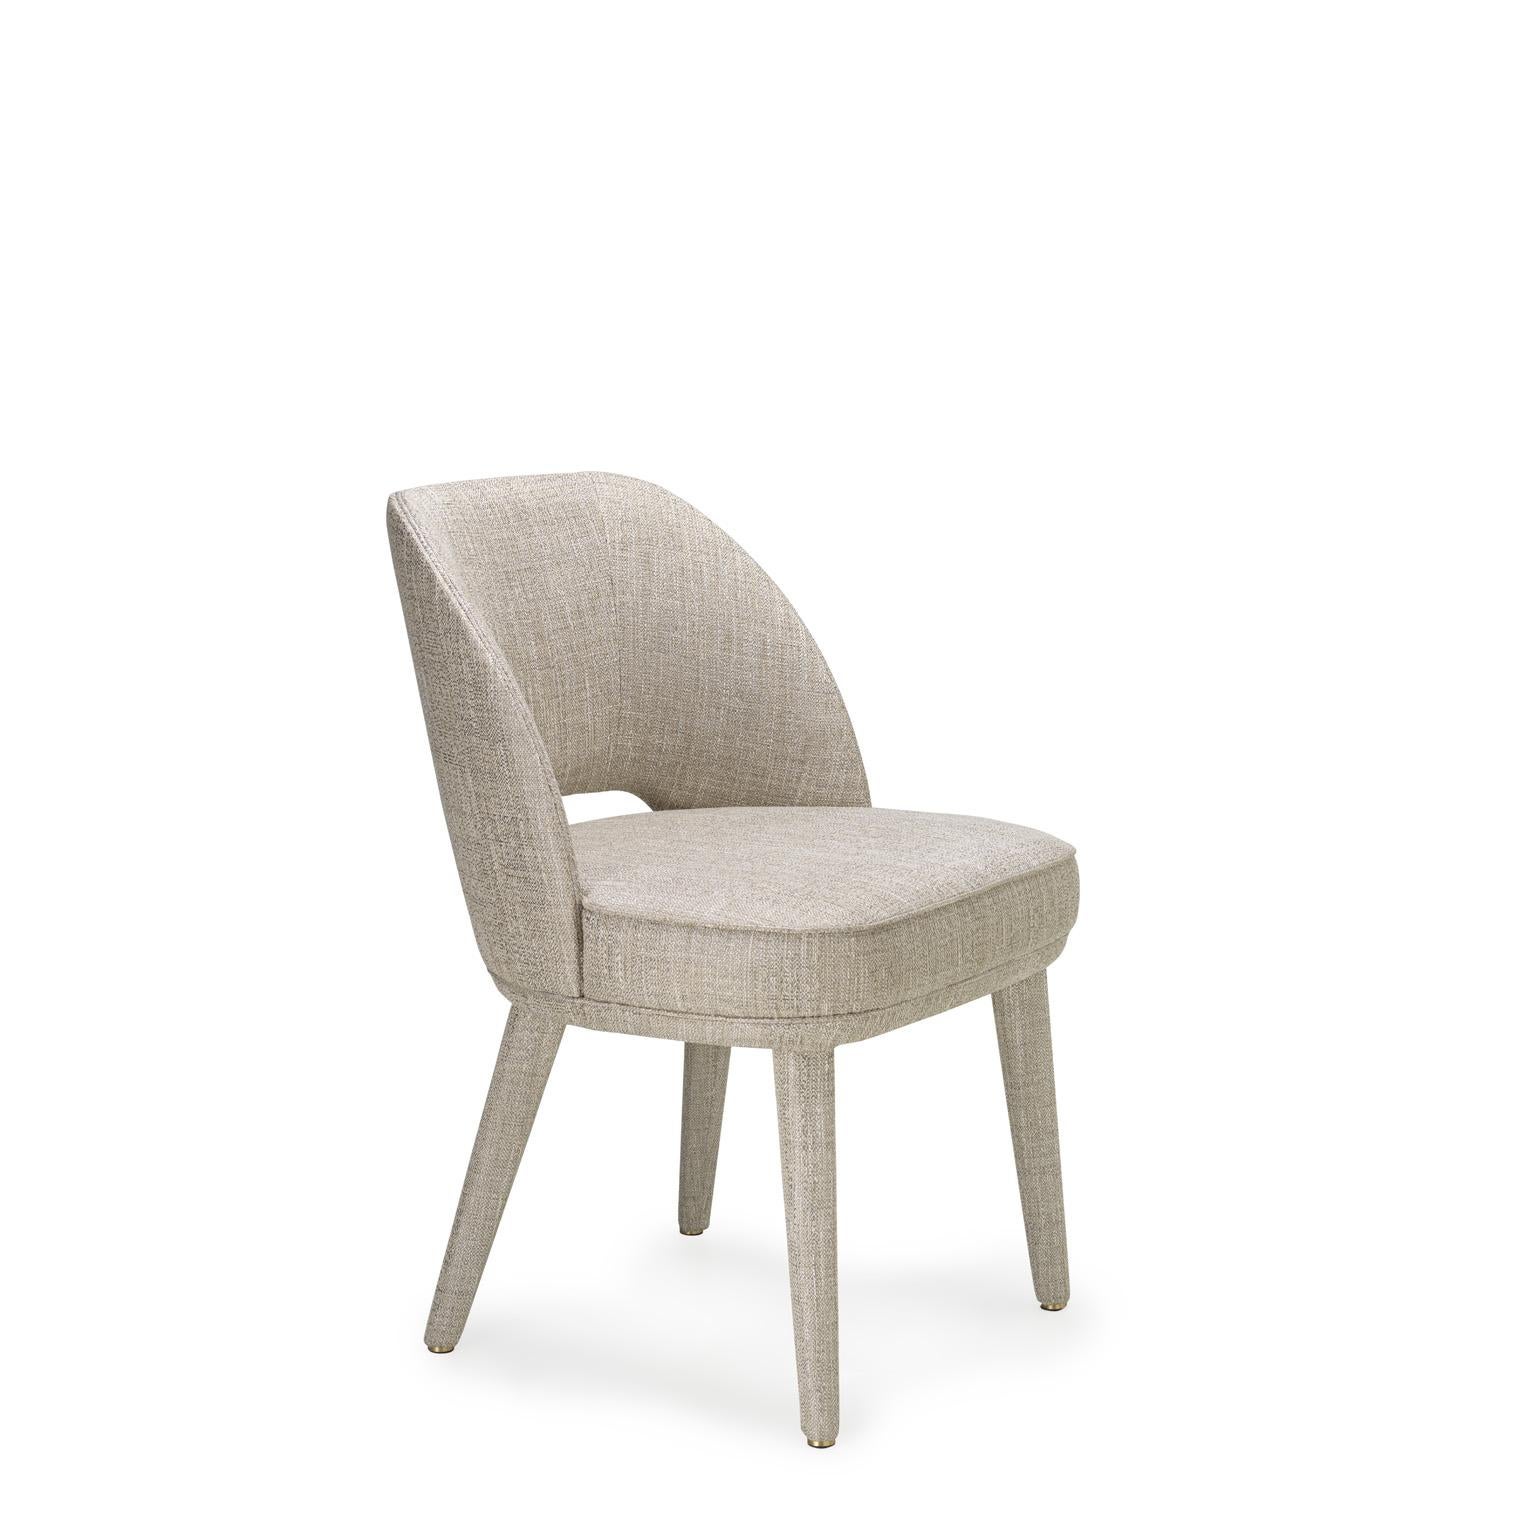 Hand-Crafted Penelope Chair in Sparks Fabric with Detail in Corno Italiano, Mod. 4430BG For Sale